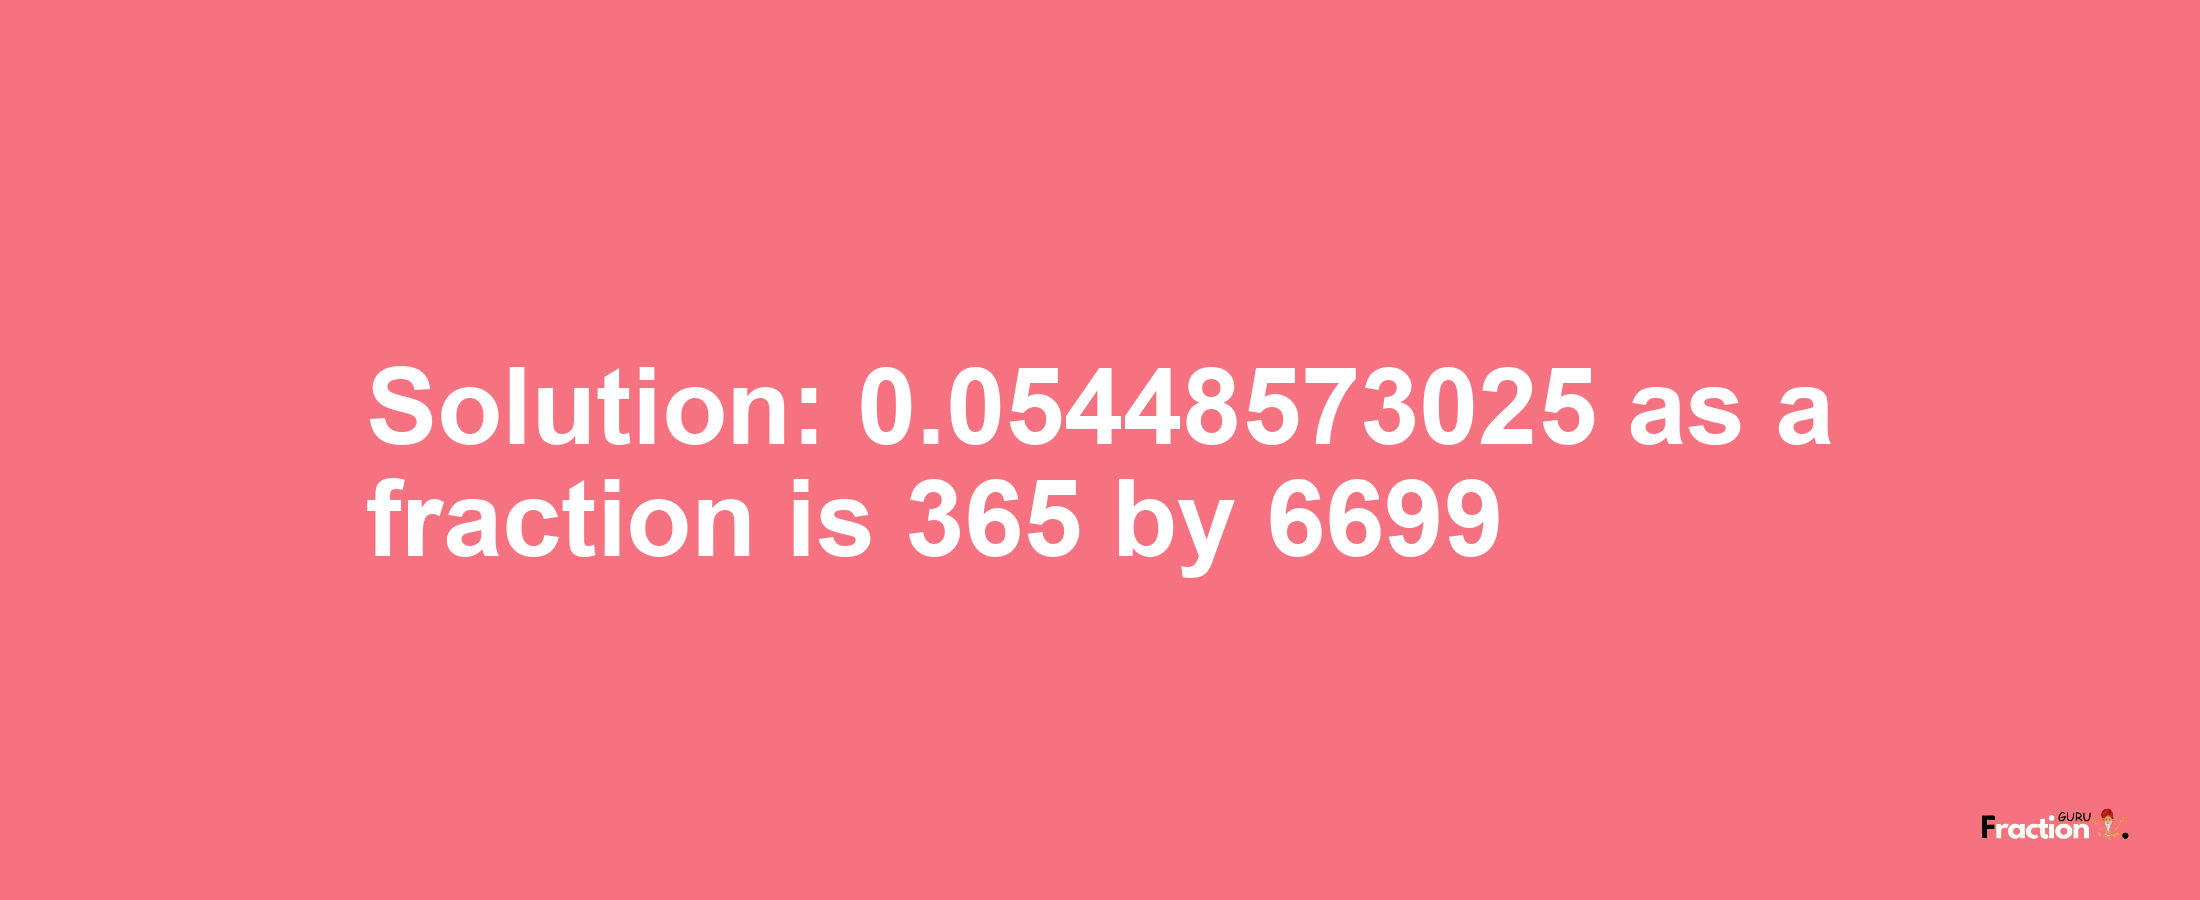 Solution:0.05448573025 as a fraction is 365/6699